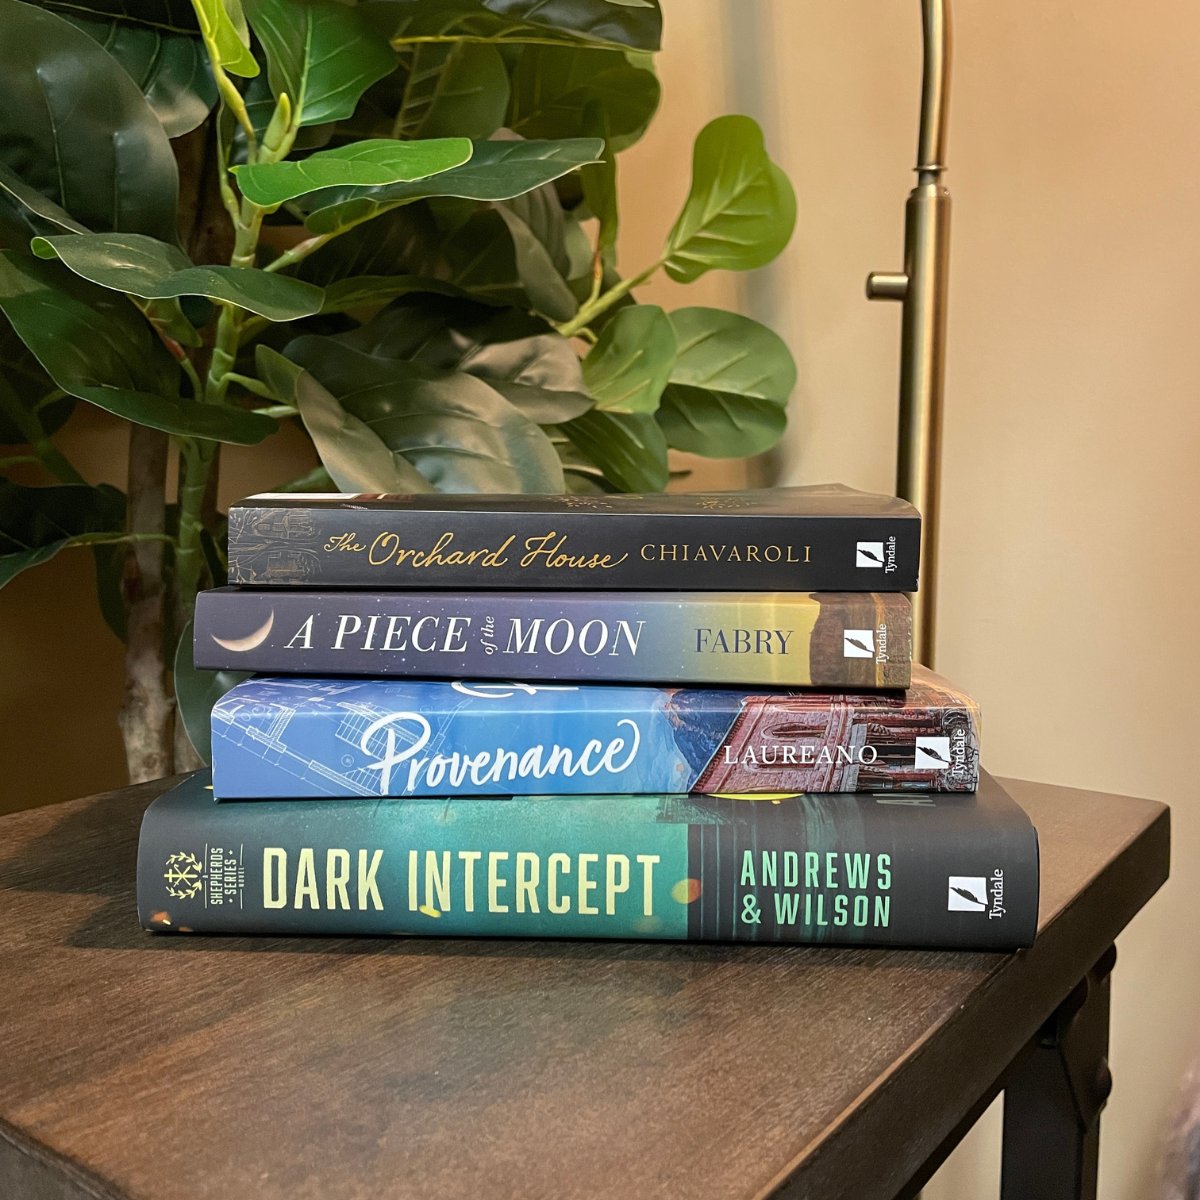 A special shout-out to @HeidiChiavaroli’s The Orchard House, @chrisfabry’s A Piece of the Moon, @CarlaLaureano's Provenance, and @BAndrewsJWilson’s Dark Intercept on being named @ACFWTweets Carol Award Finalists! Congrats! 🎉 tyndale.life/CarolAwards2022